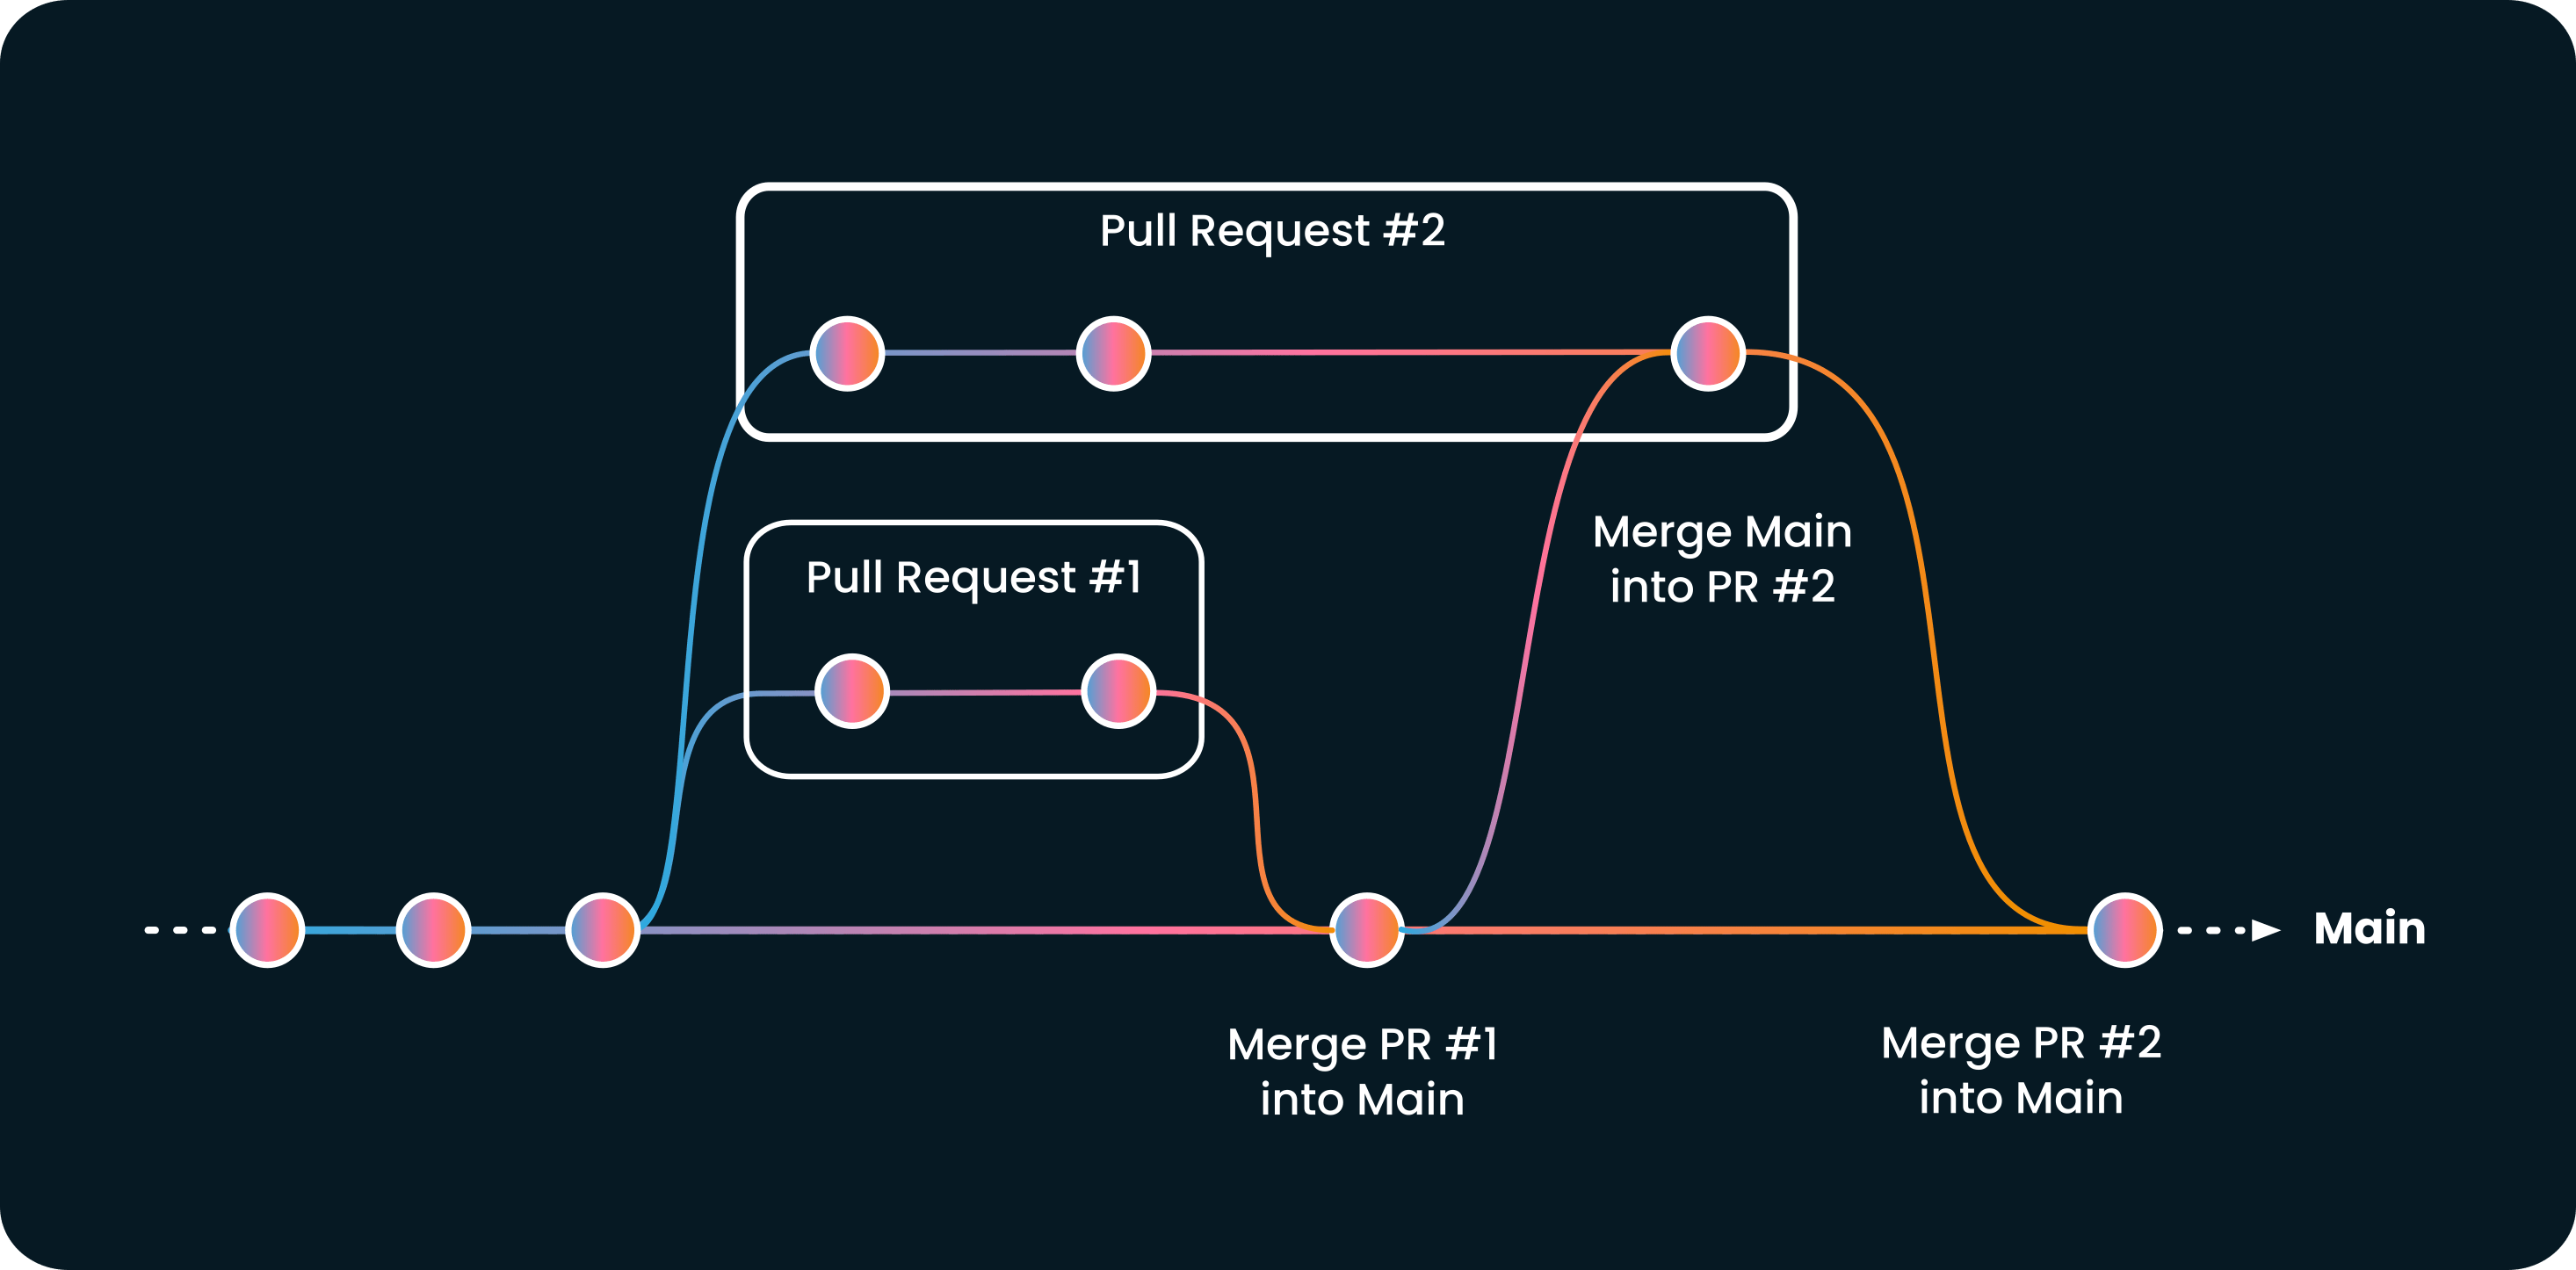 Enforcing Best Practices and Easing Onboarding with a Merge Queue